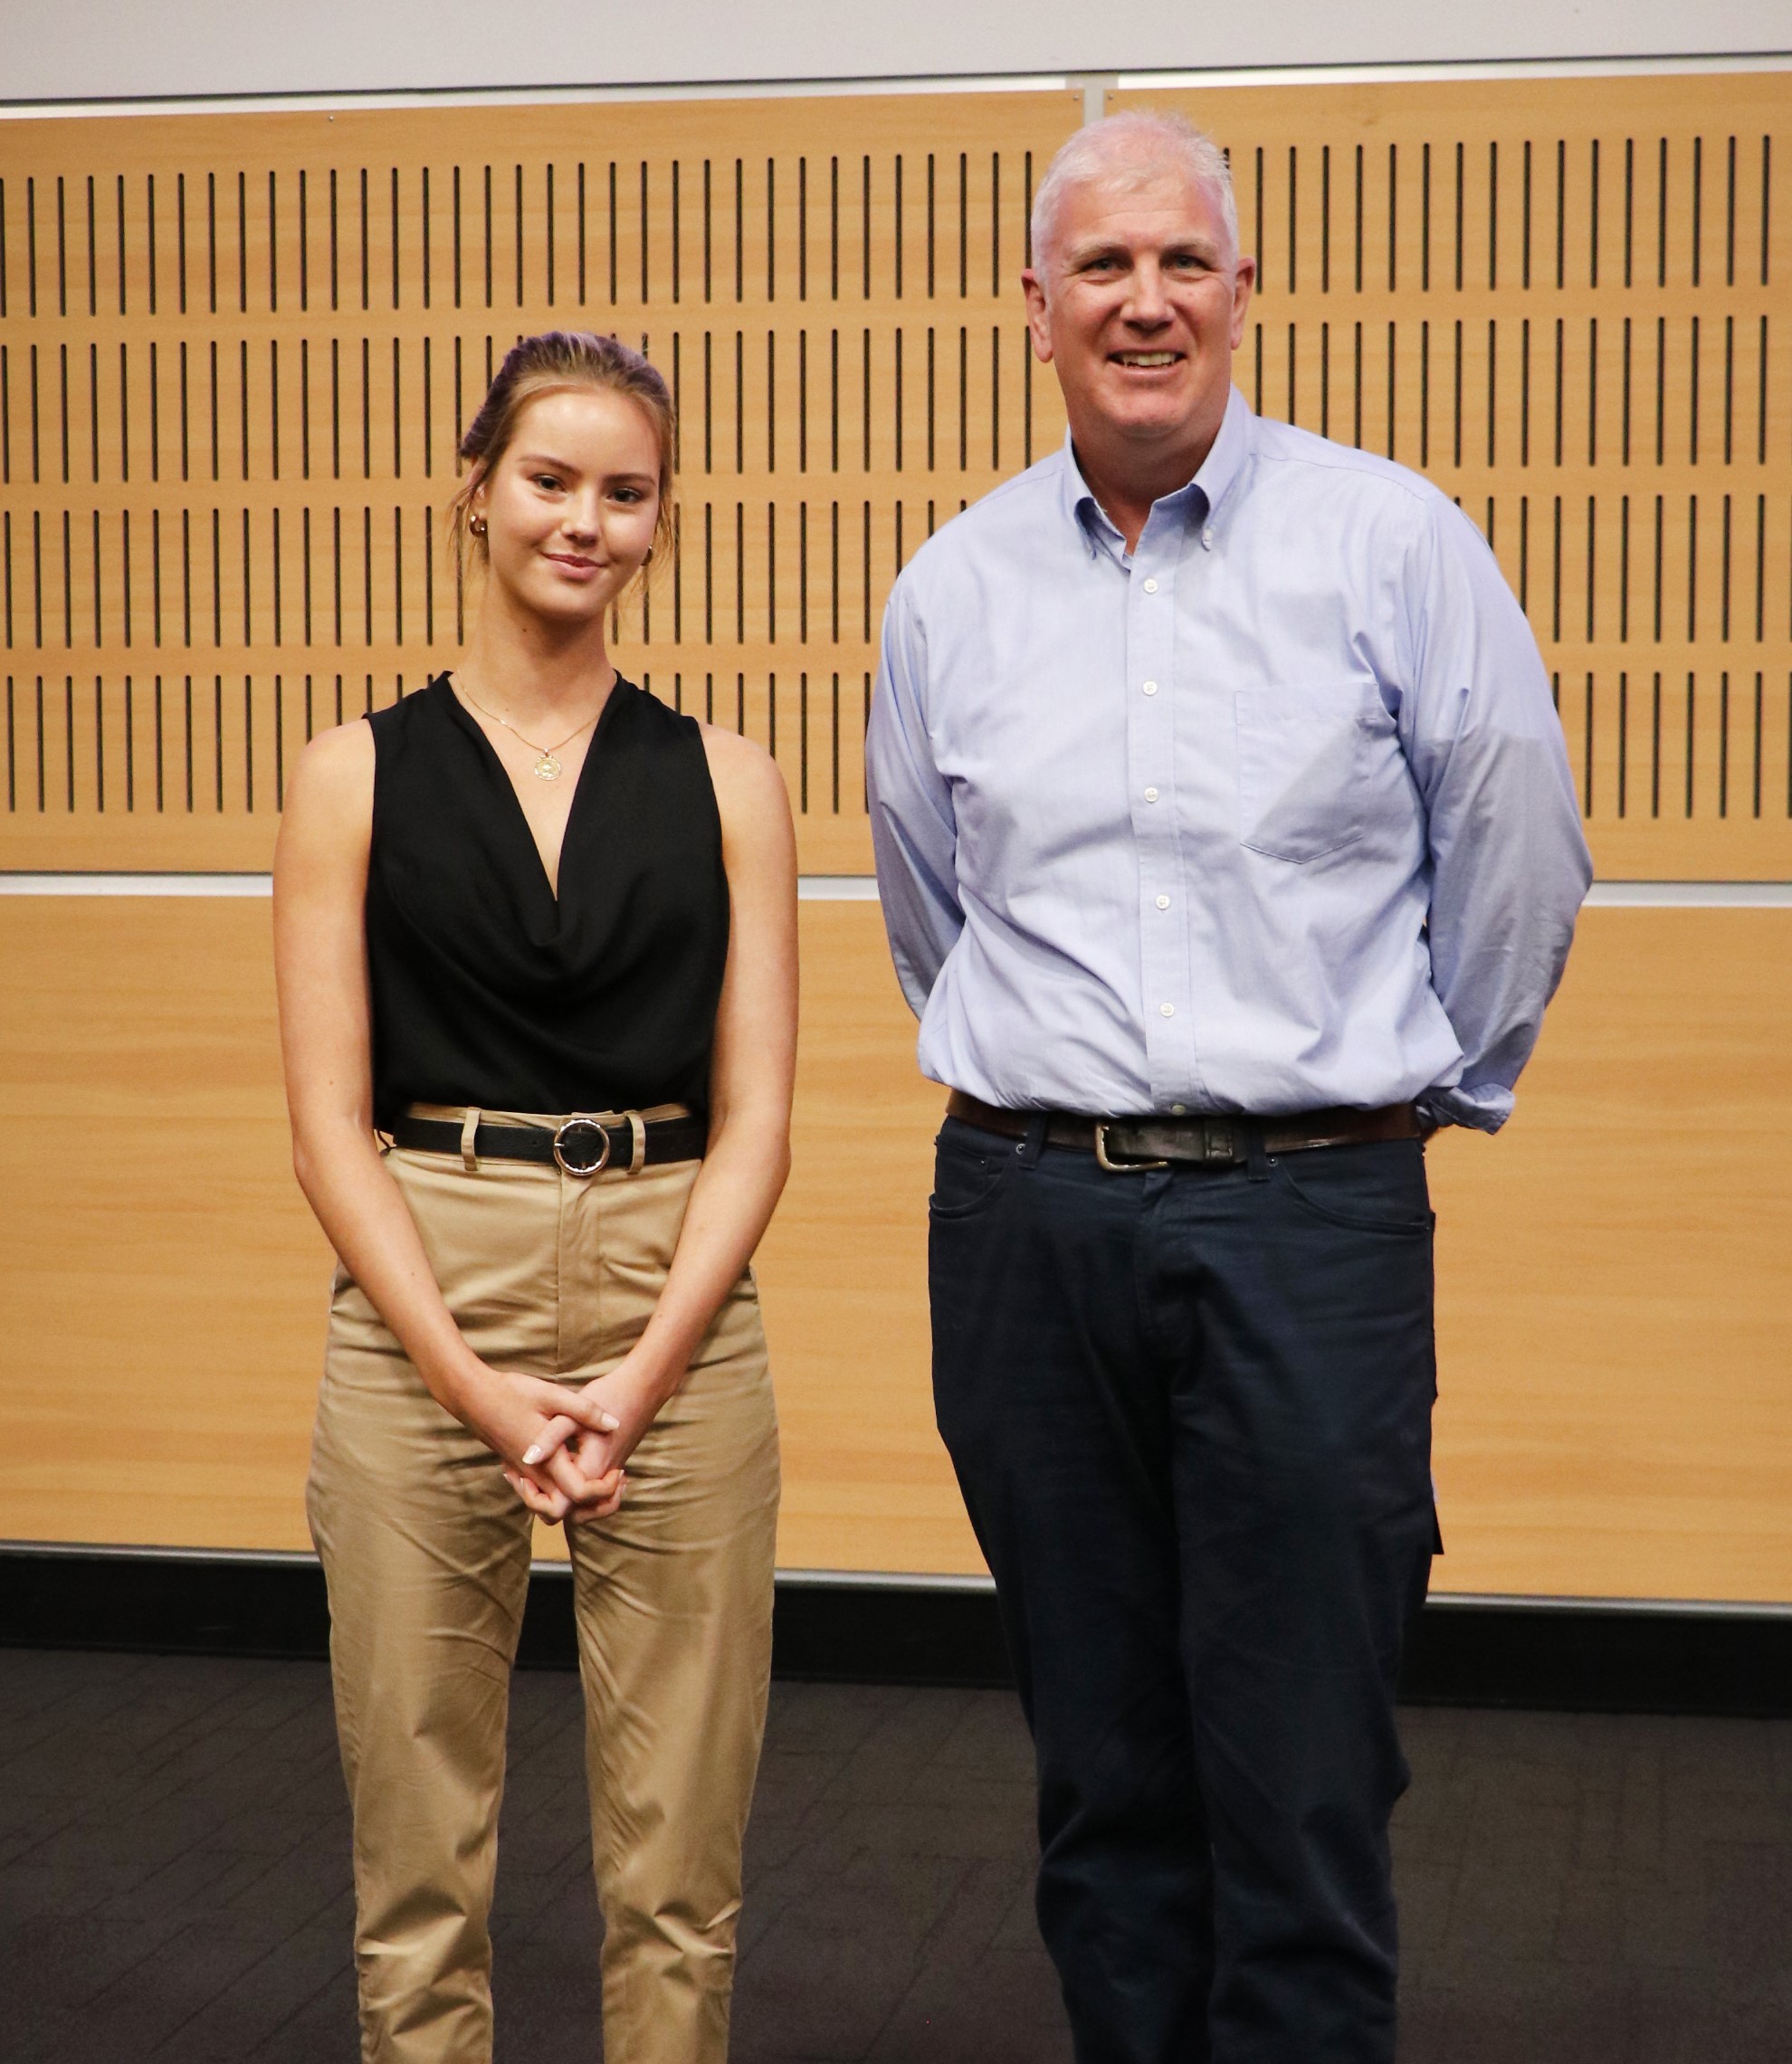 Lara Berge and Chris Eldridge at the Startup Academy pitch event (in Abel Smith lecture theatre)